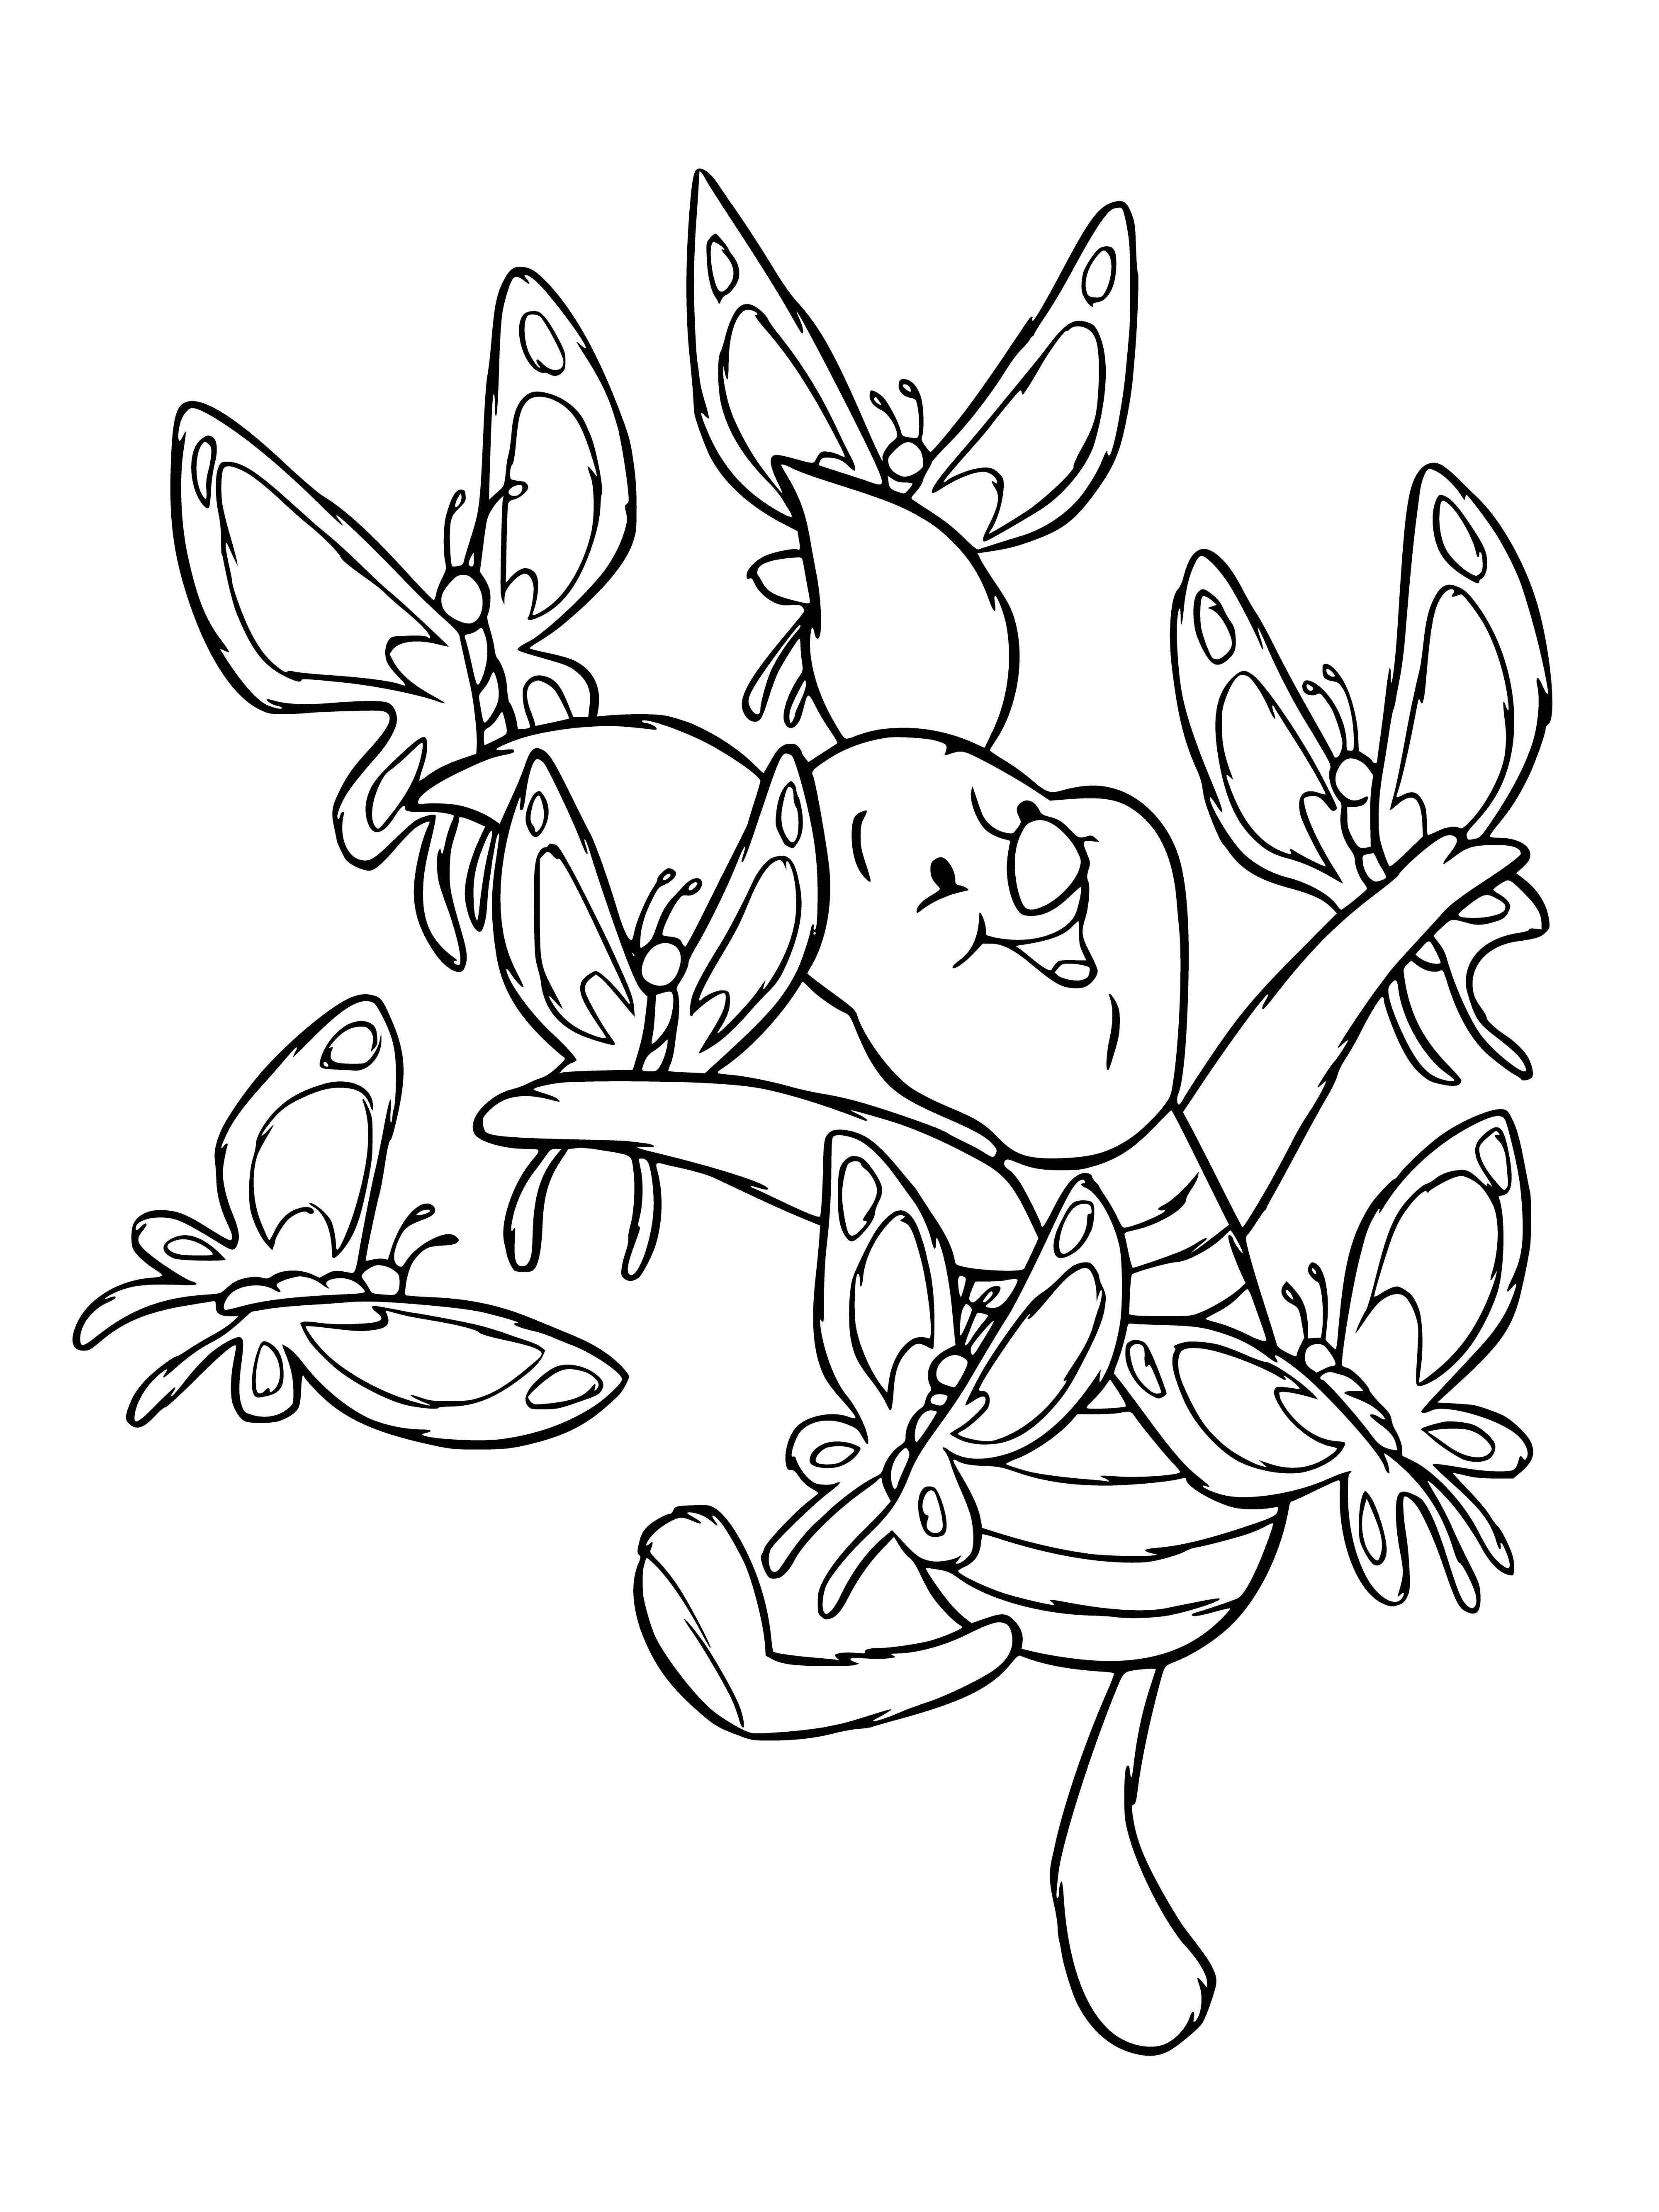 coloring page: Pig with 5 colored butterflies around it, happily lounging in the grass.